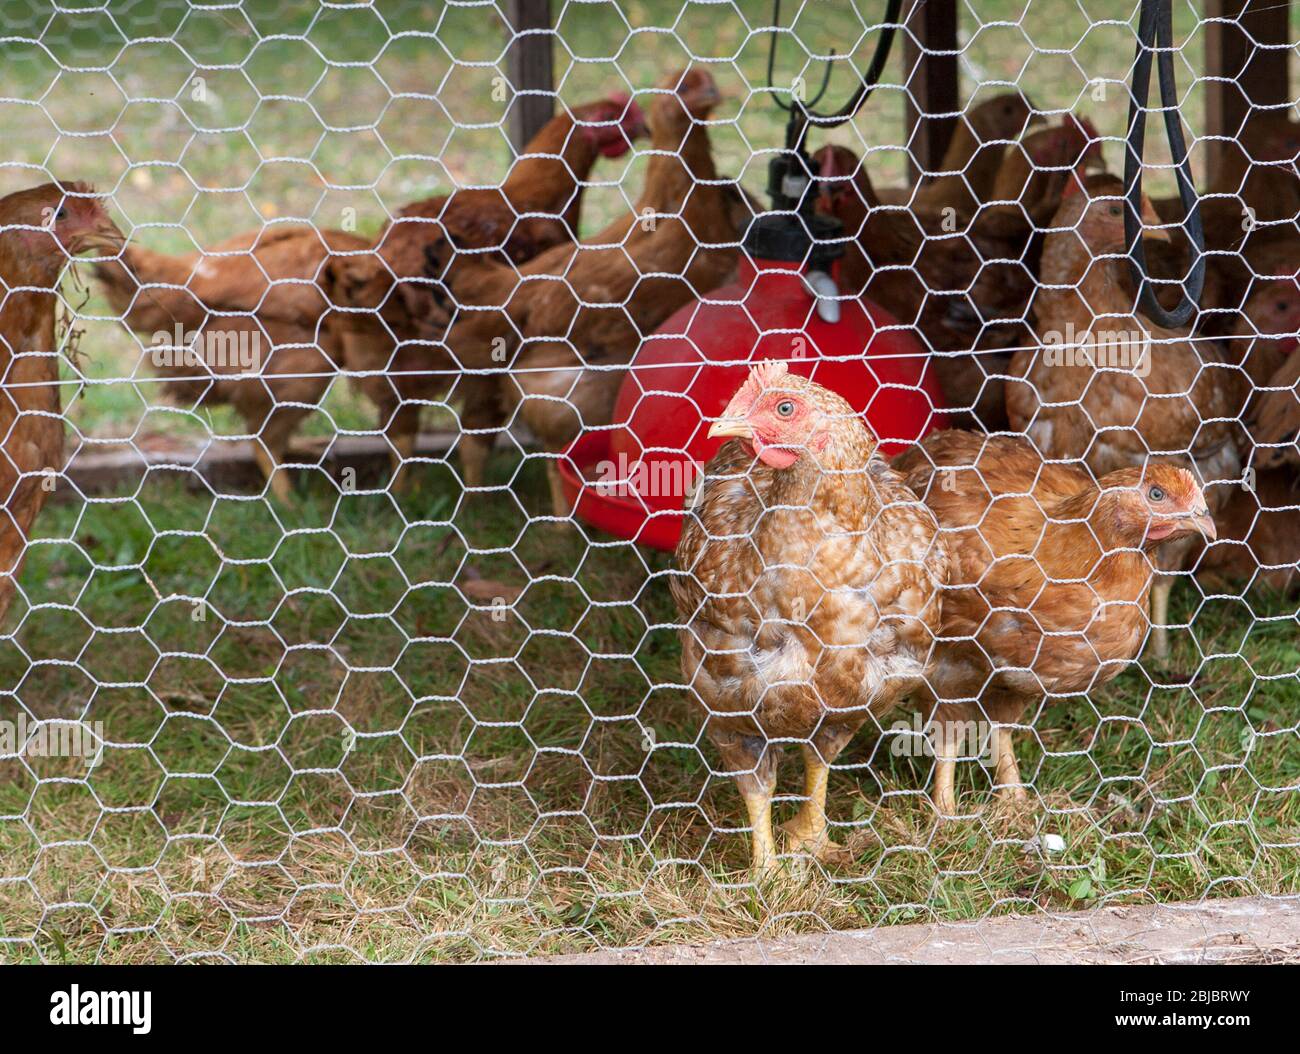 Chickens in an outdoor enclosure peer through chicken wire on a small organic farm in Madison, CT, USA Stock Photo